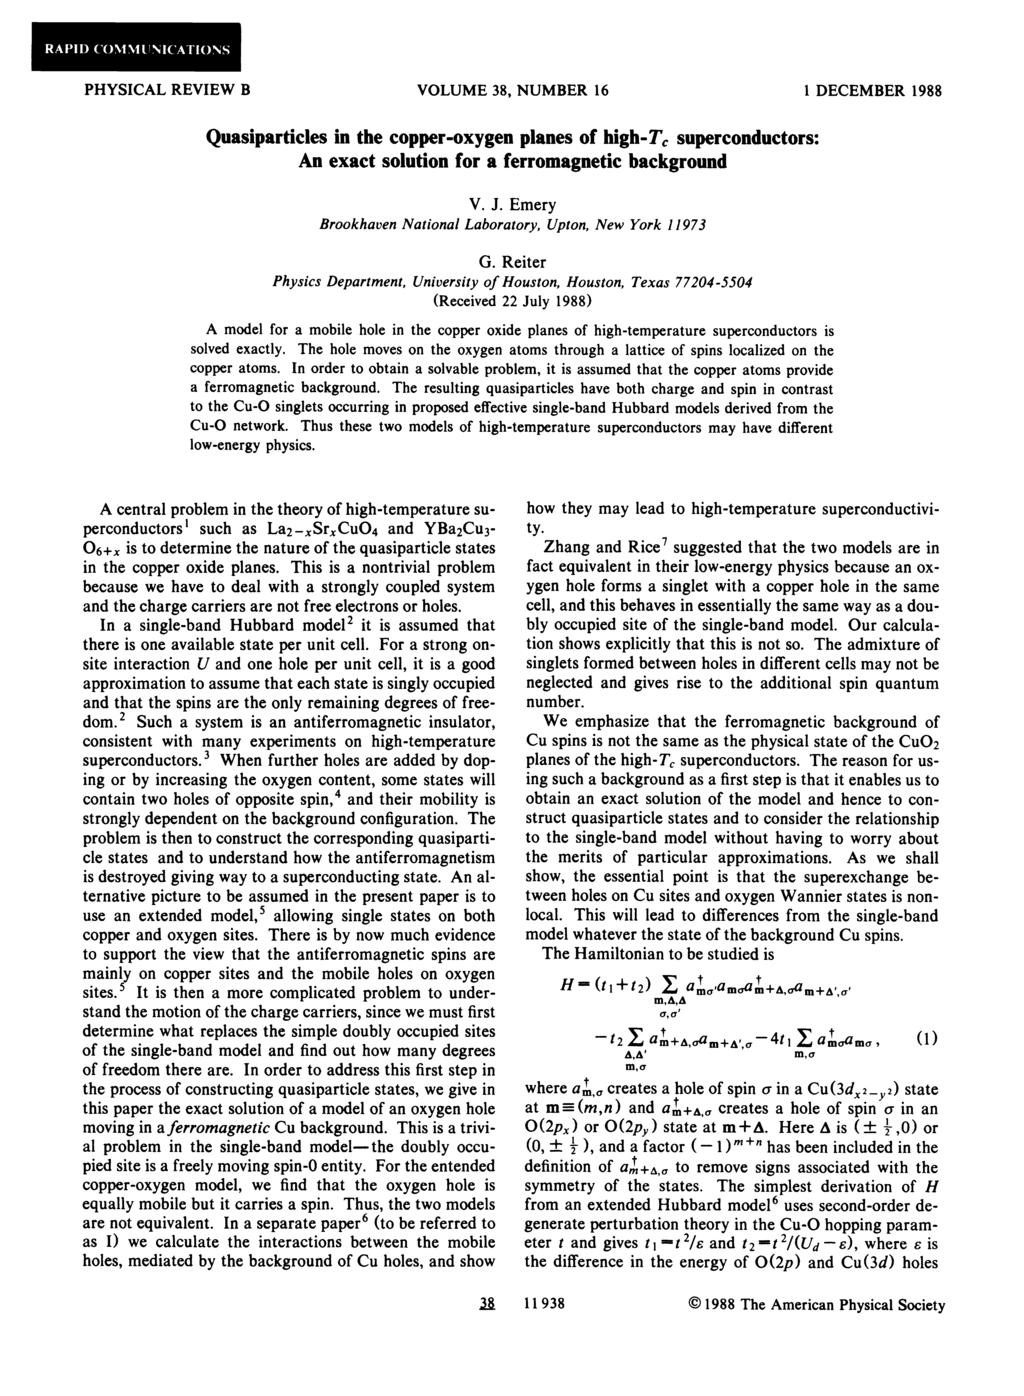 Reiter Physics Department, University of Houston, Houston, Texas 77204 5504- (Received 22 July 1988) A model for a mobile hole in the copper oxide planes of high-temperature superconductors is solved